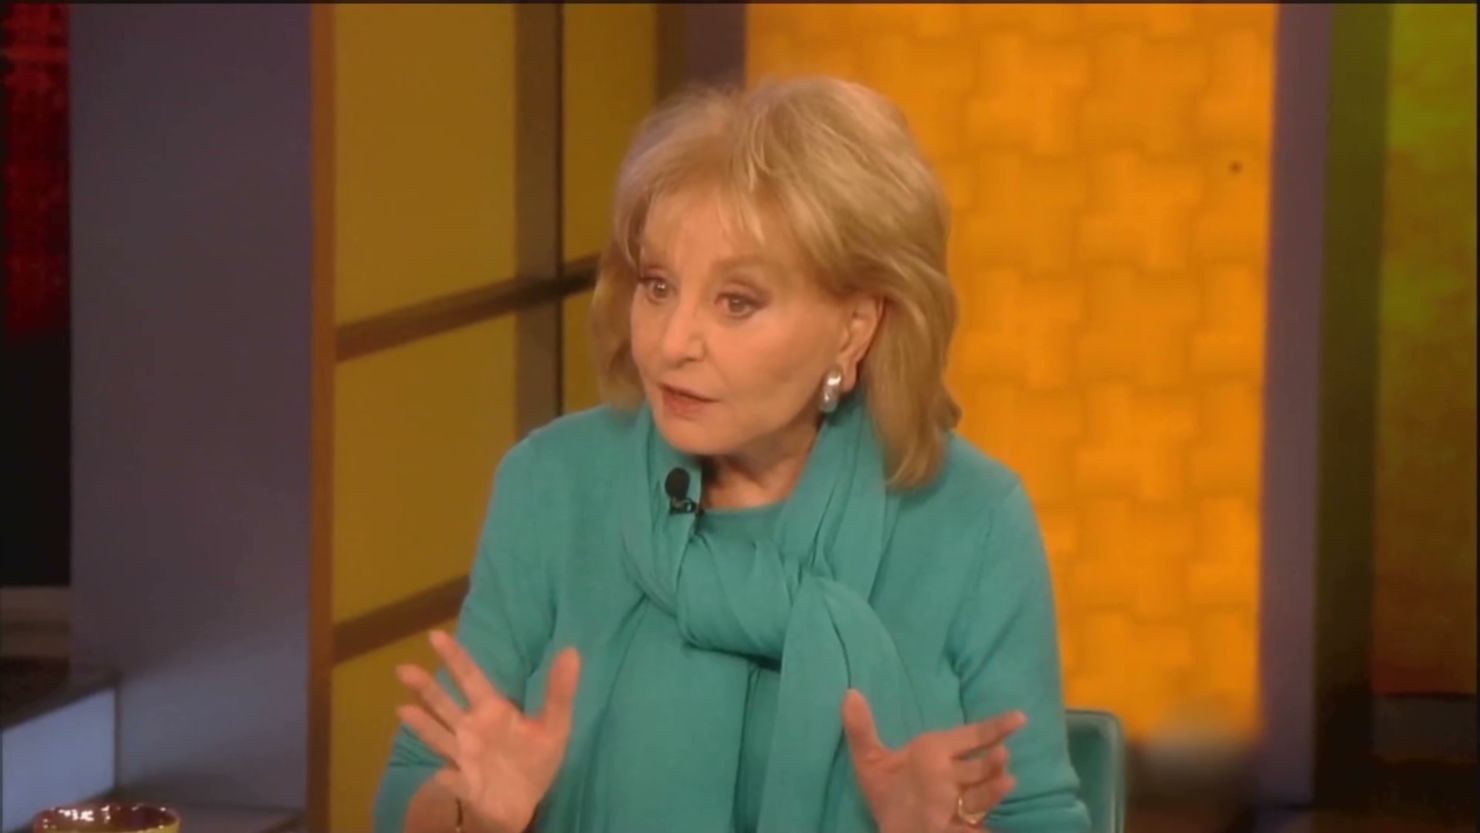 Iconic TV personality Barbara Walters, 83, fell on a stair Saturday and cut her head, ABC said.